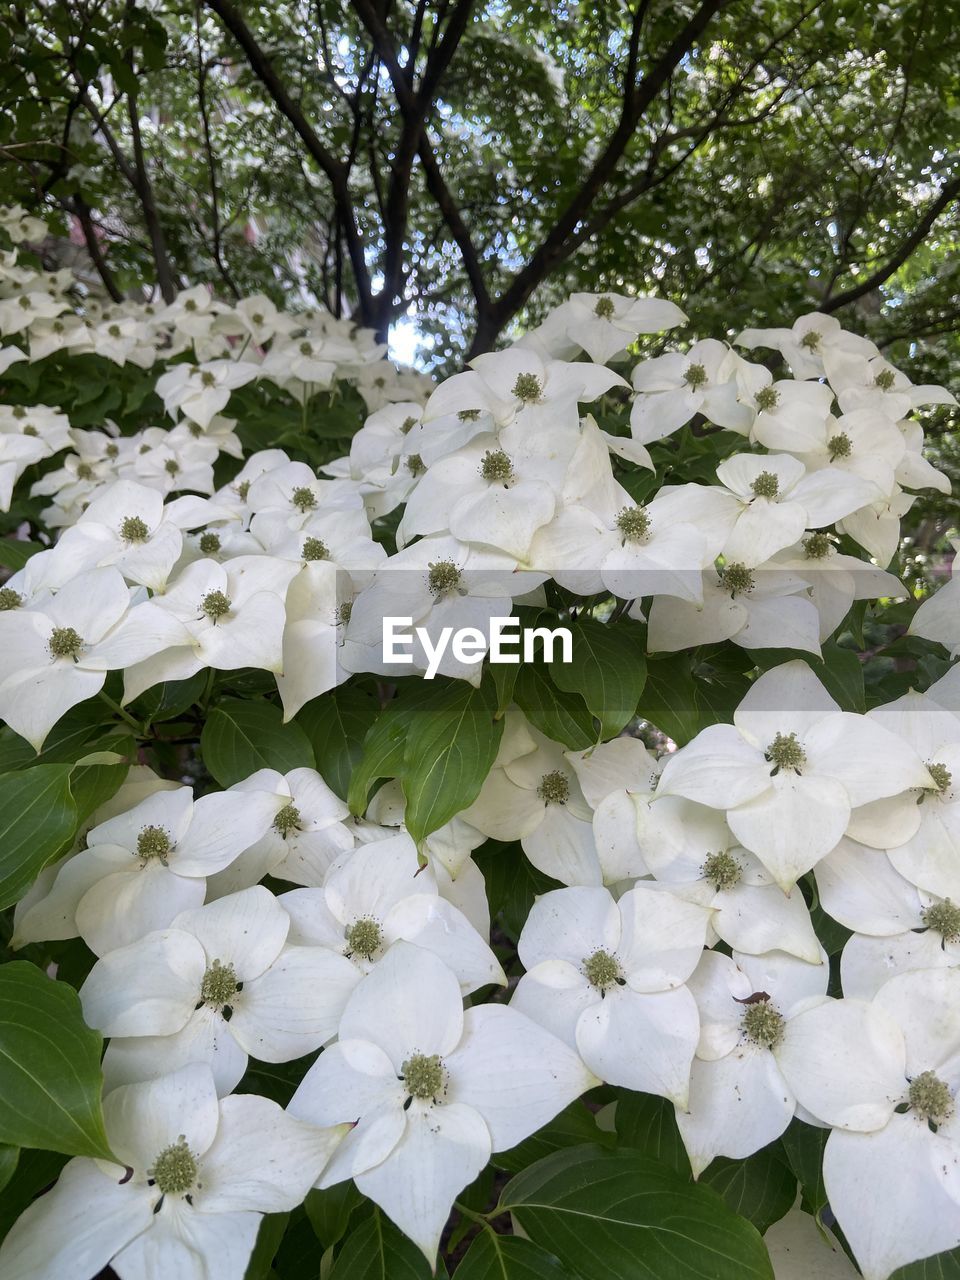 plant, flower, flowering plant, beauty in nature, growth, freshness, white, nature, fragility, blossom, petal, leaf, plant part, tree, no people, close-up, inflorescence, flower head, springtime, day, outdoors, green, botany, low angle view